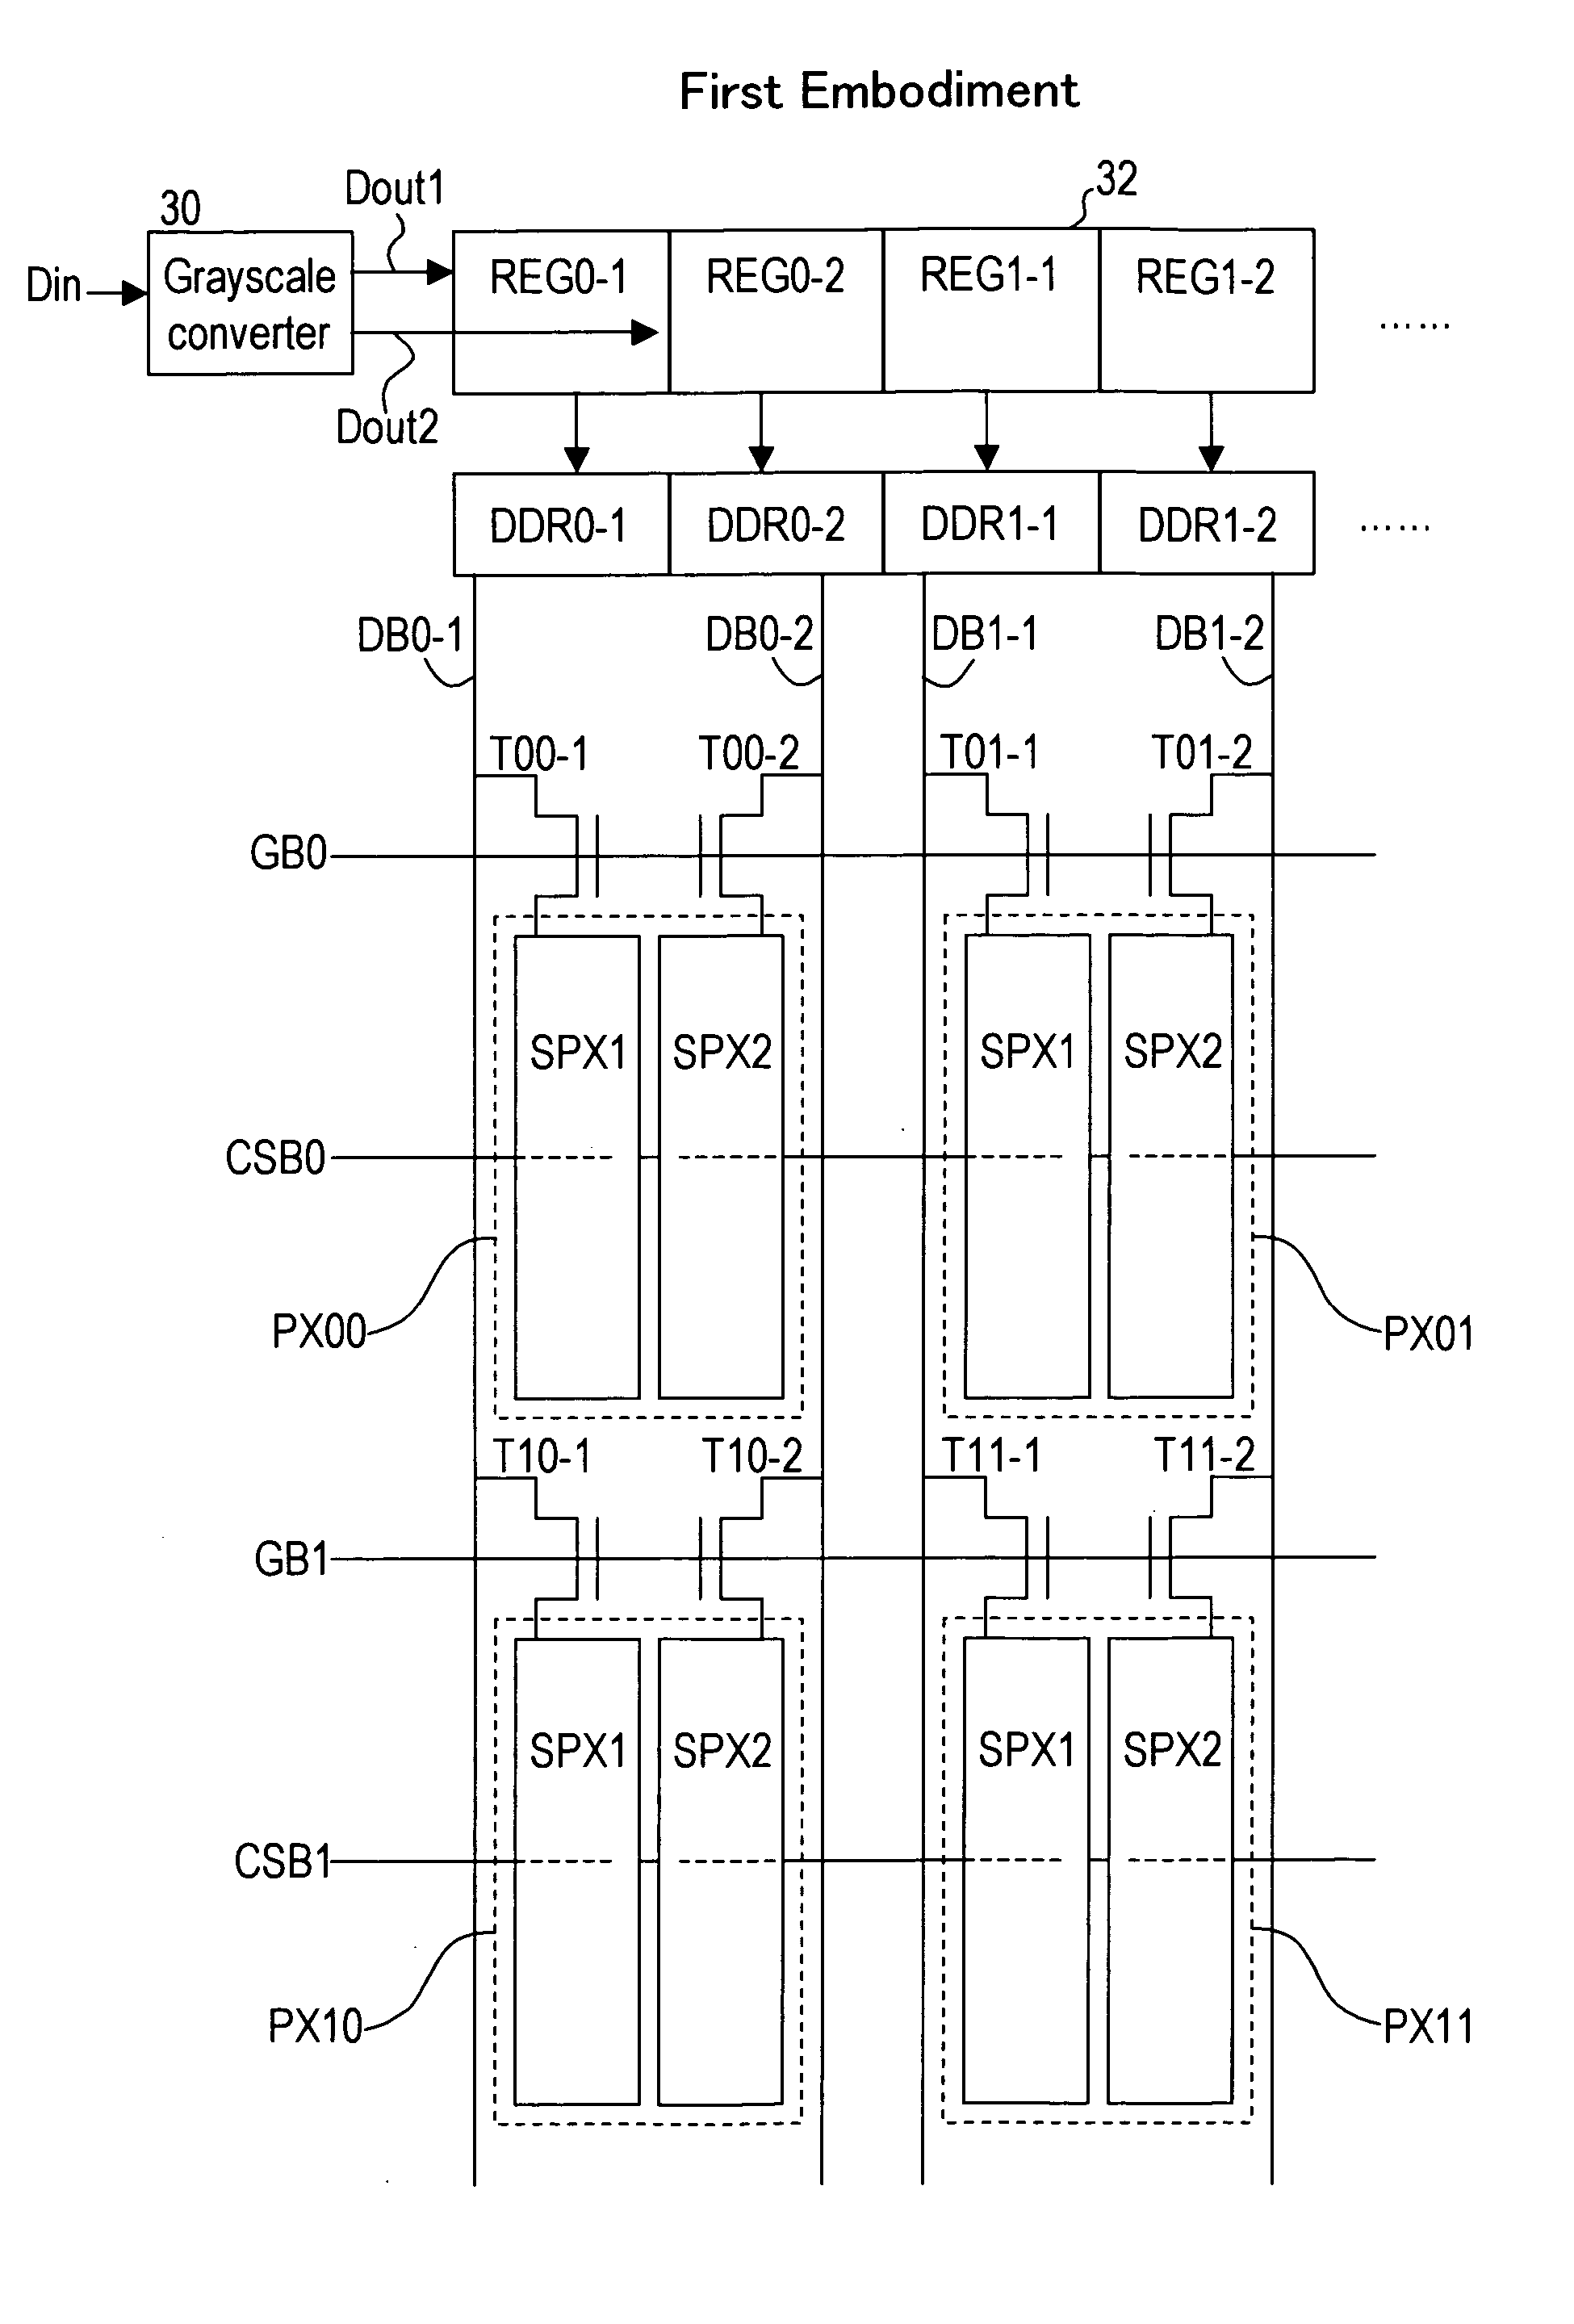 Liquid crystal display device with improved viewing angle characteristics